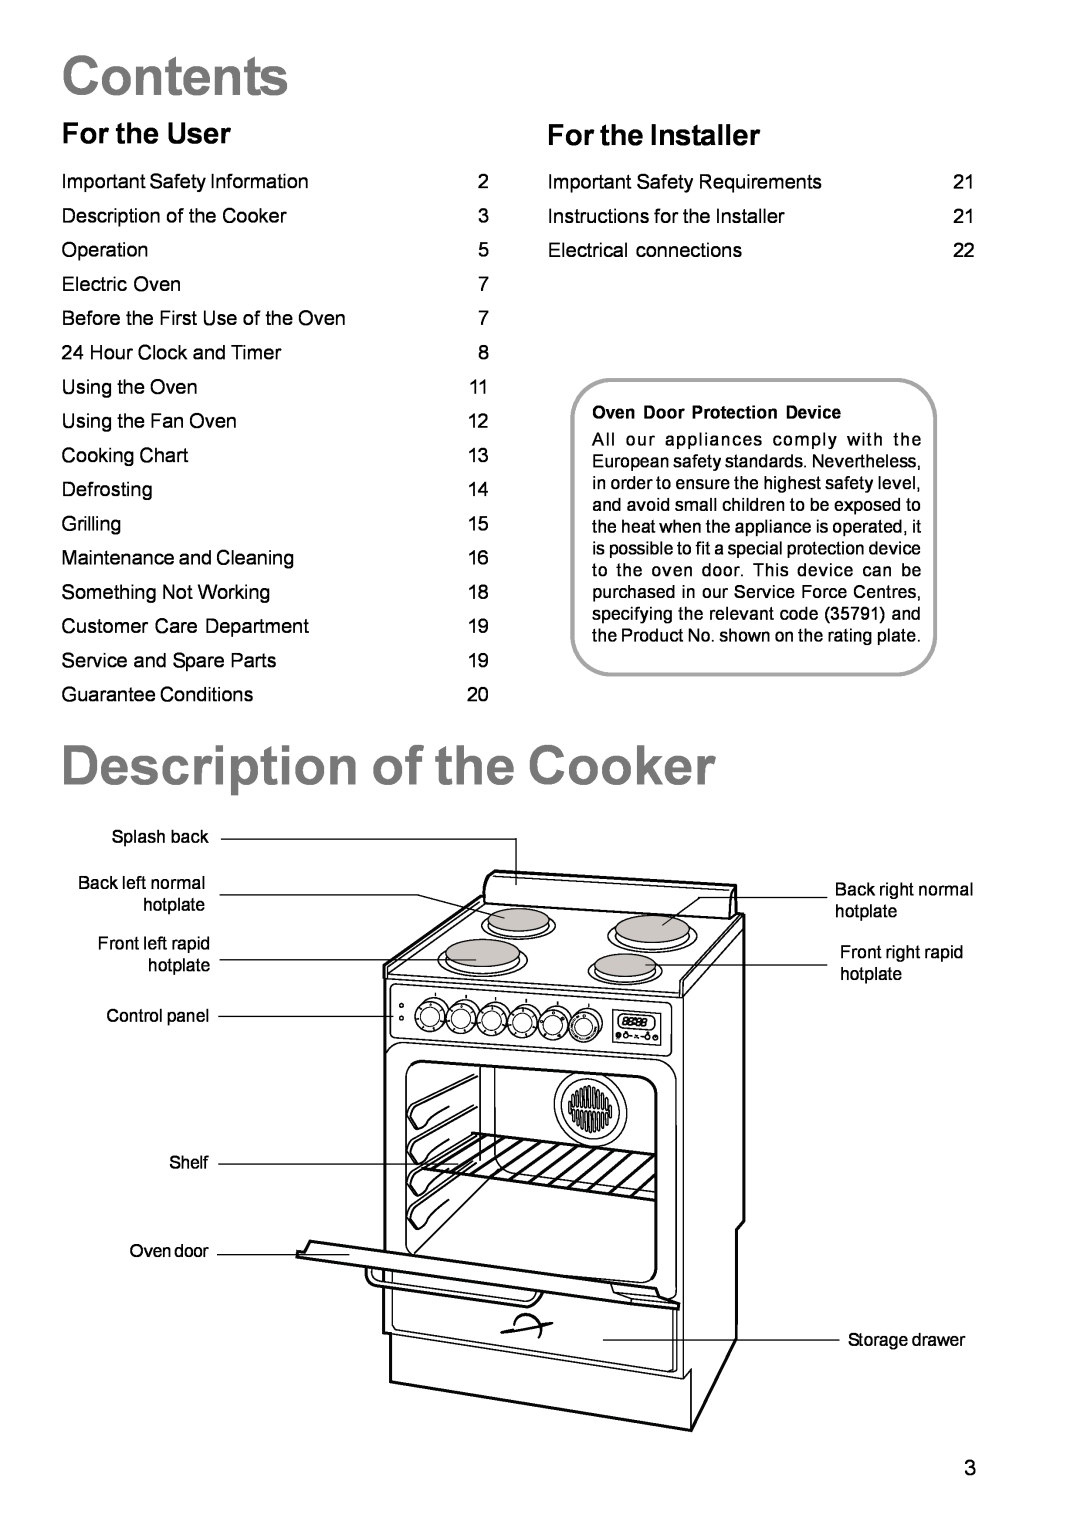 Zanussi ZCE 611 manual Contents, Description of the Cooker, For the User, For the Installer 